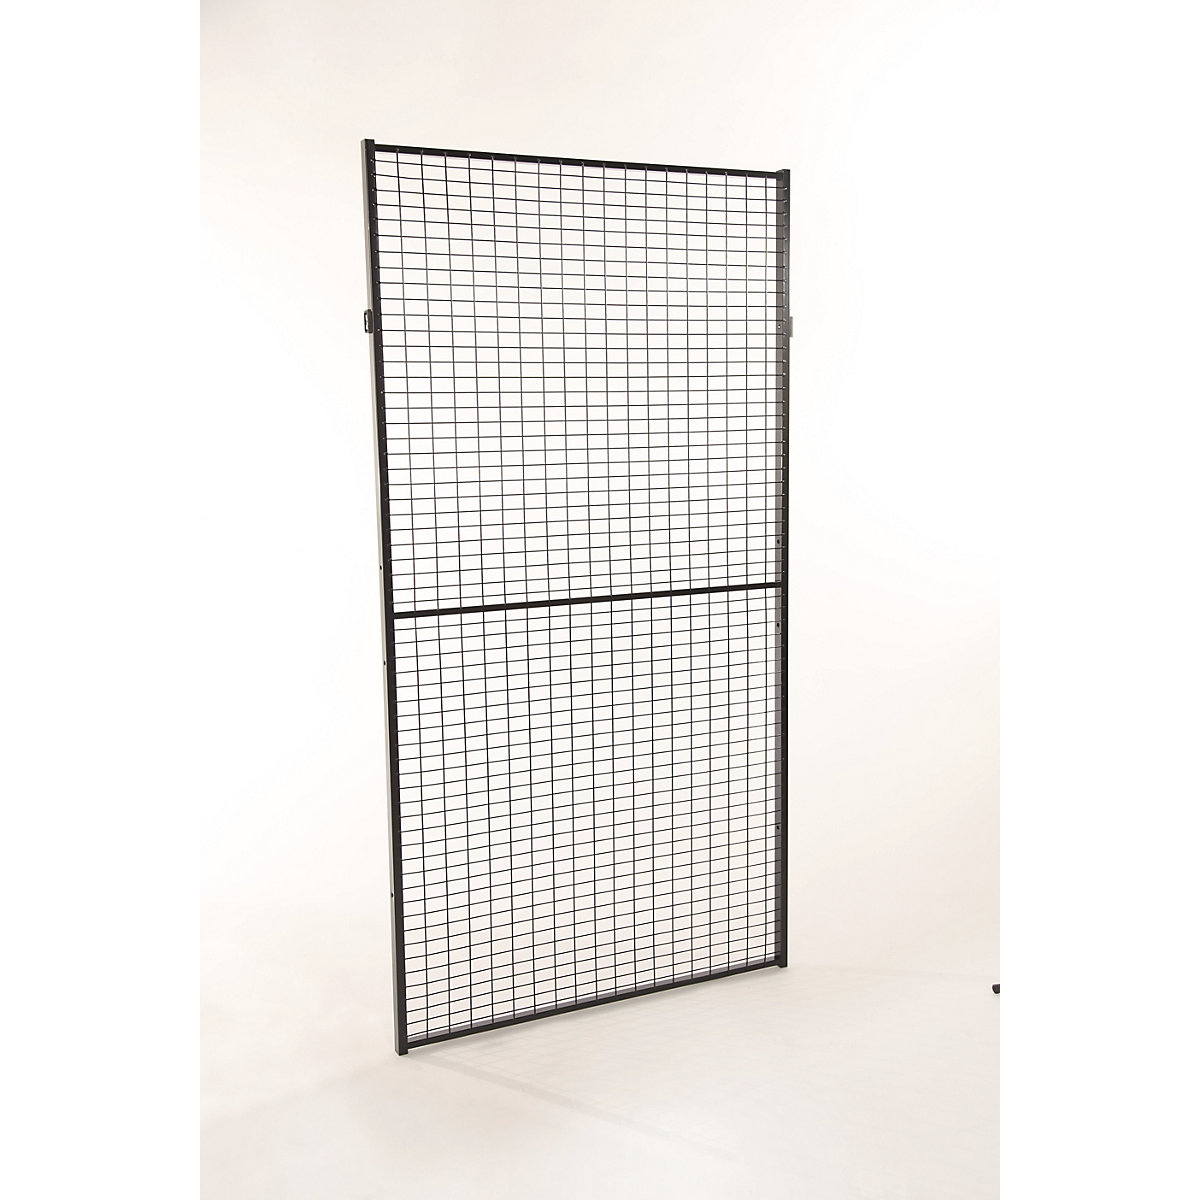 X-GUARD CLASSIC machine protective fencing, wall section – Axelent, height 2200 mm, width 600 mm-15